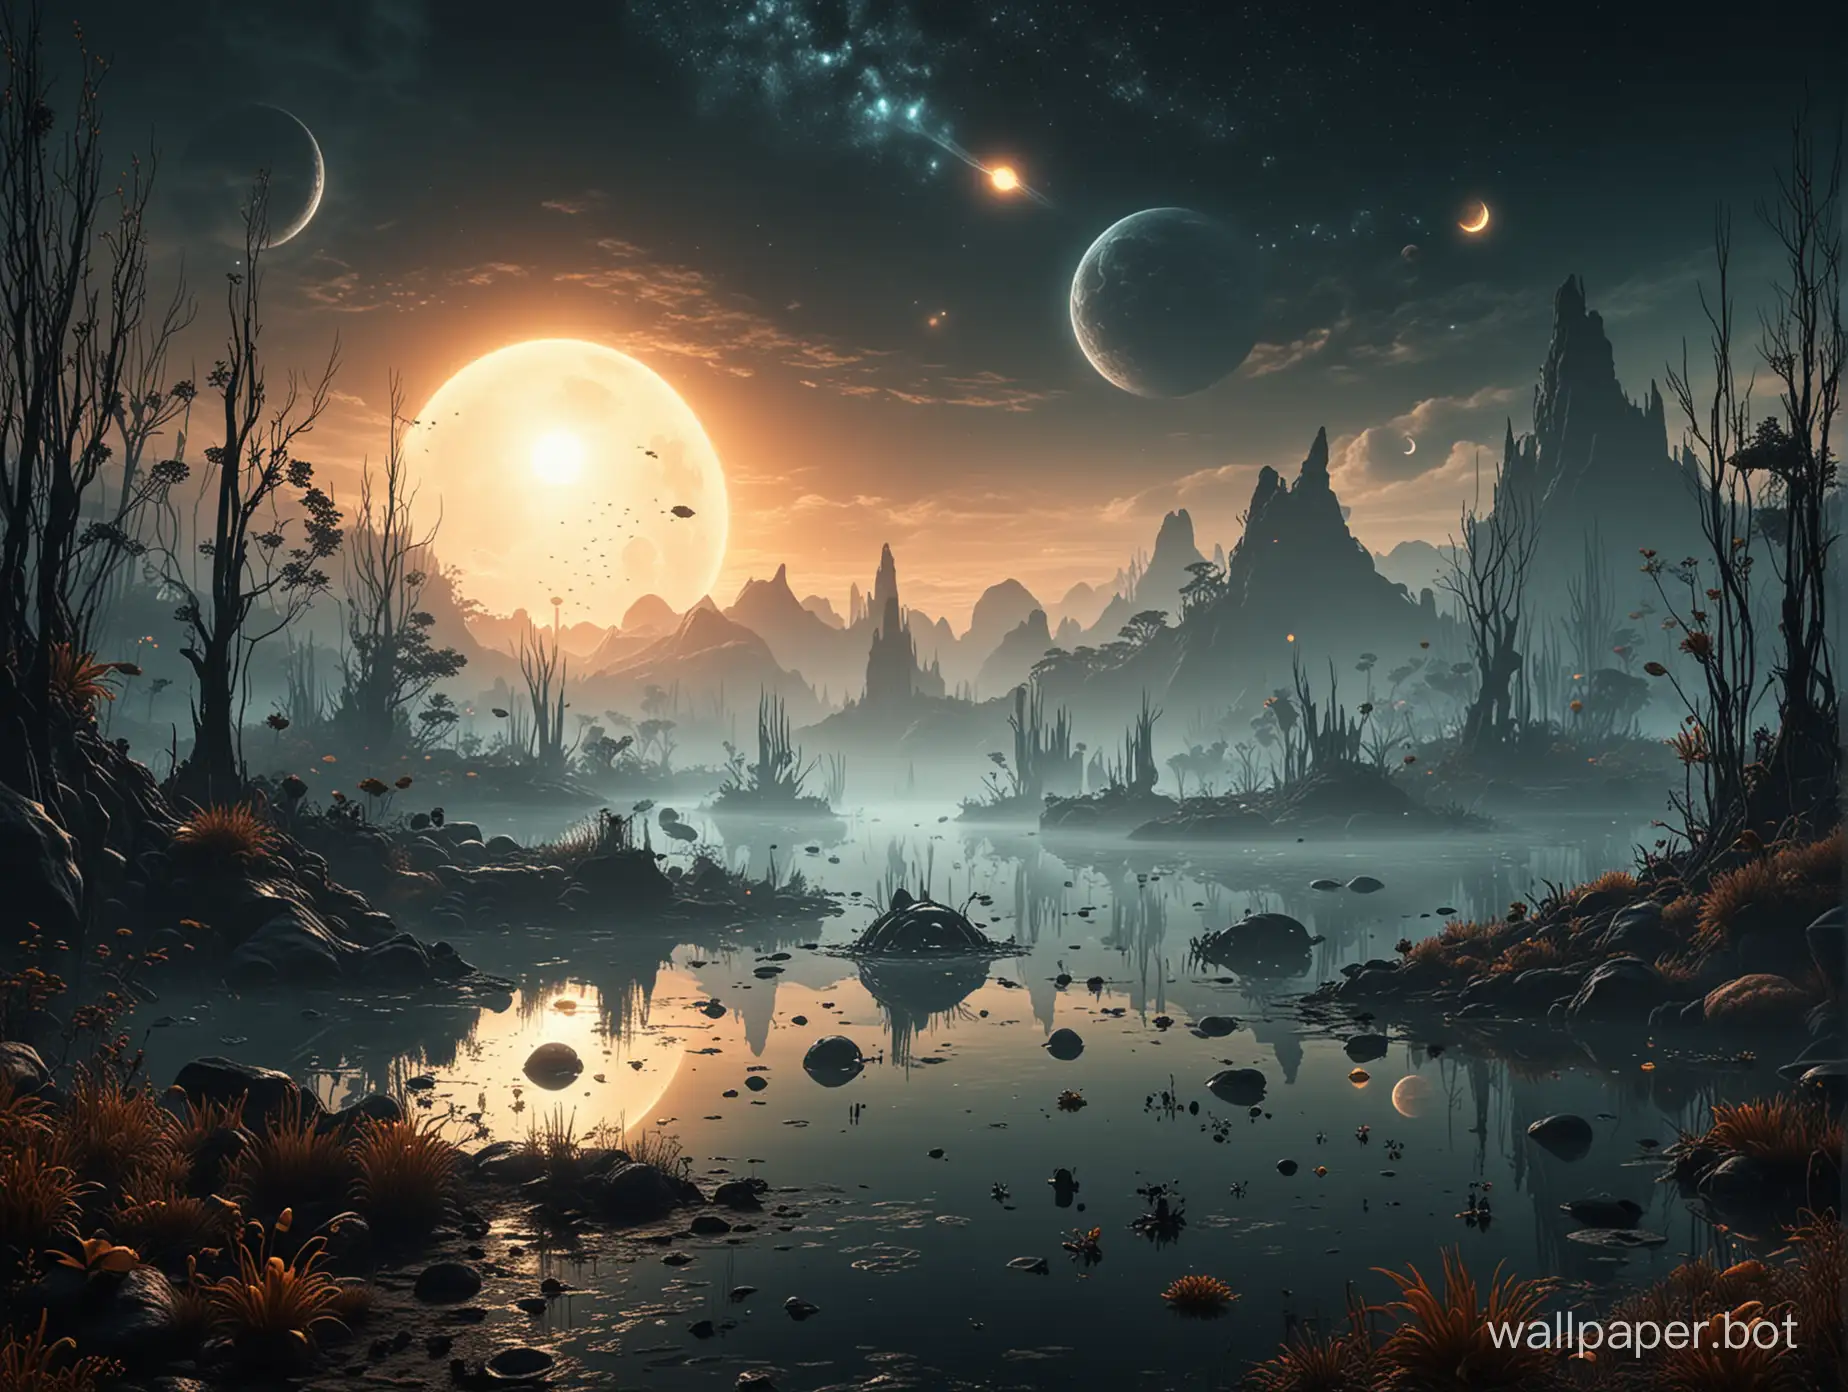 Mysterious-Alien-Landscape-Dark-Foggy-Planet-with-Strange-Lake-and-Aliens